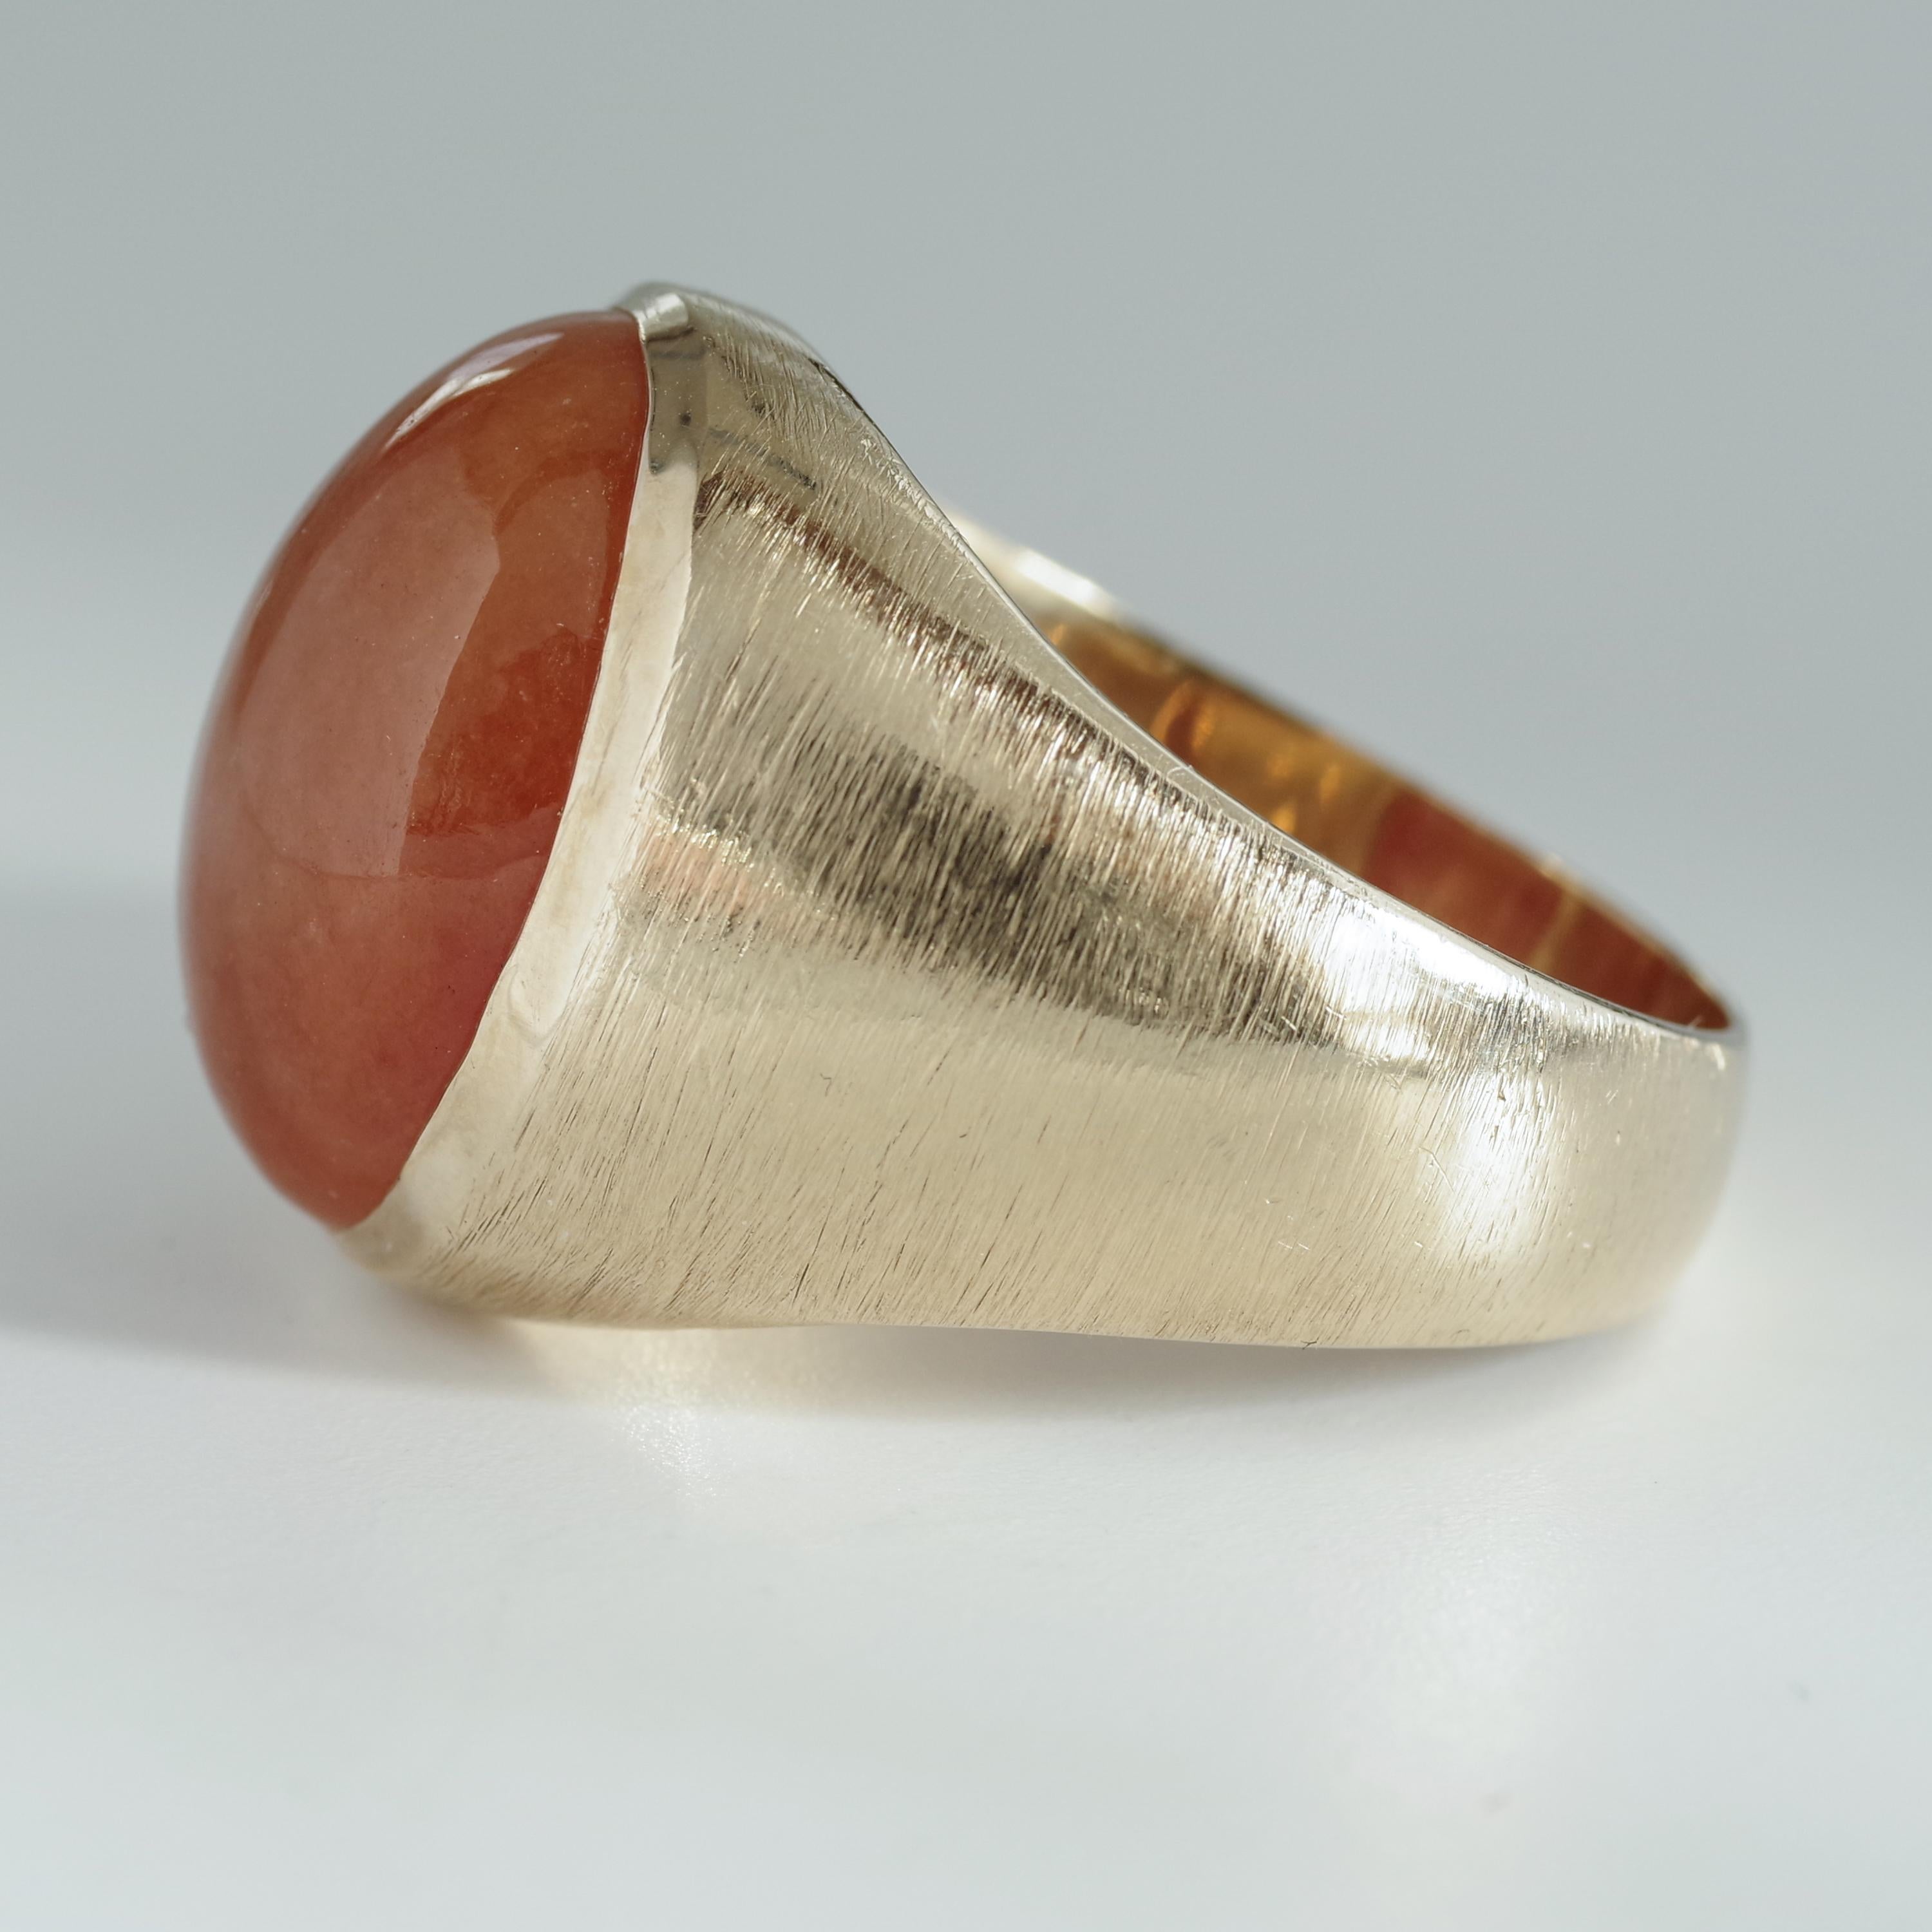 Certified Untreated Red Jade Ring from Midcentury 1